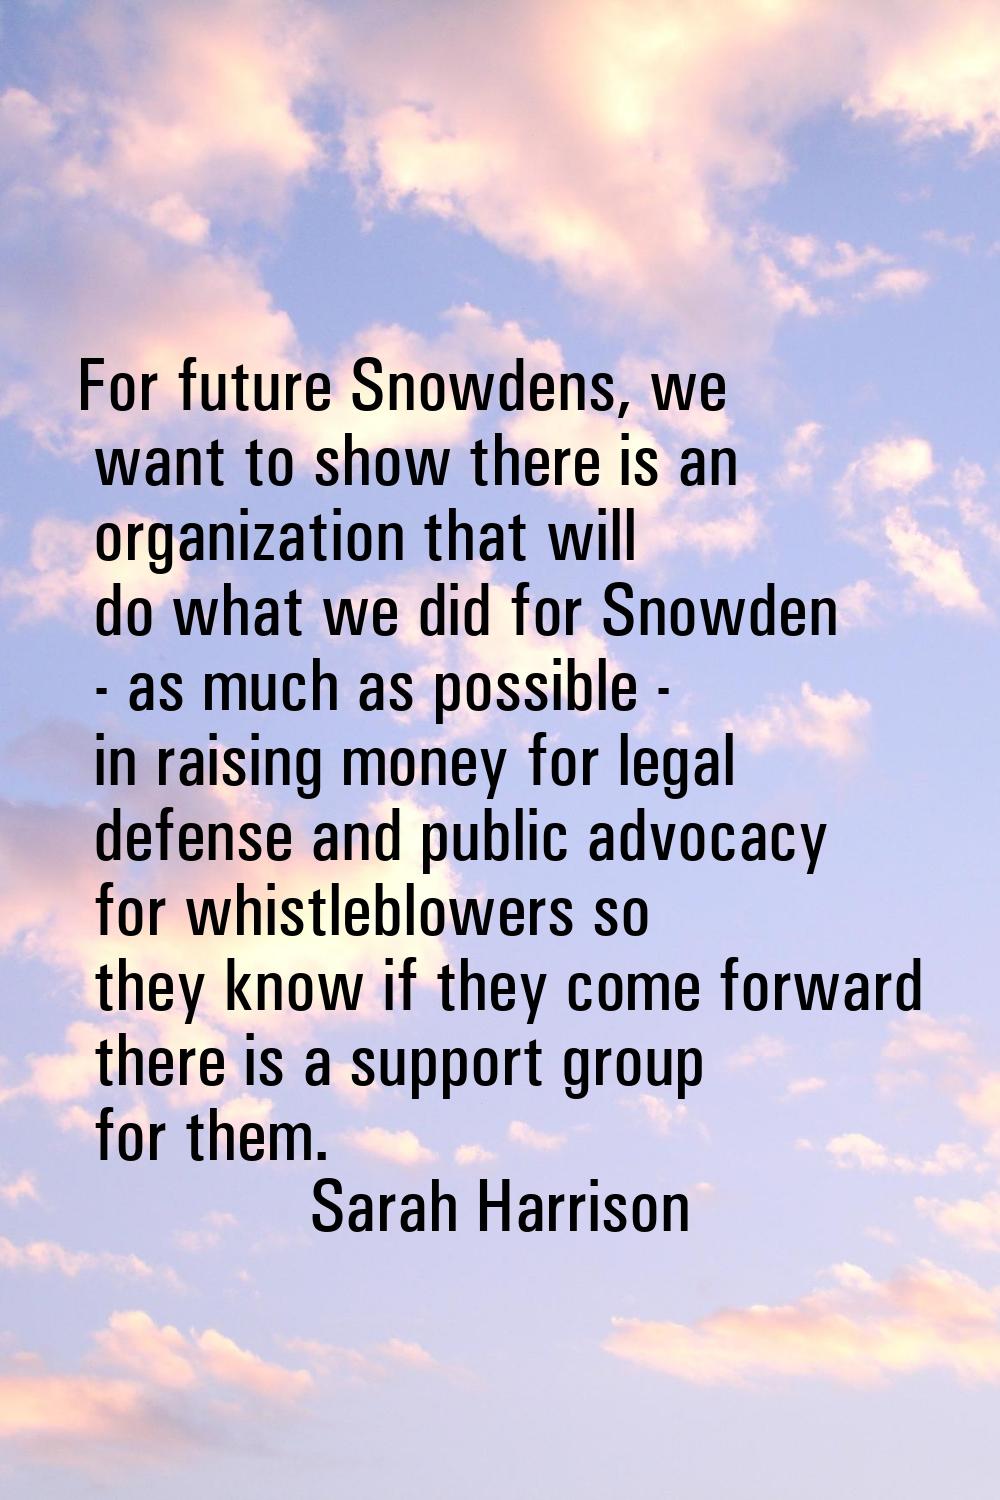 For future Snowdens, we want to show there is an organization that will do what we did for Snowden 